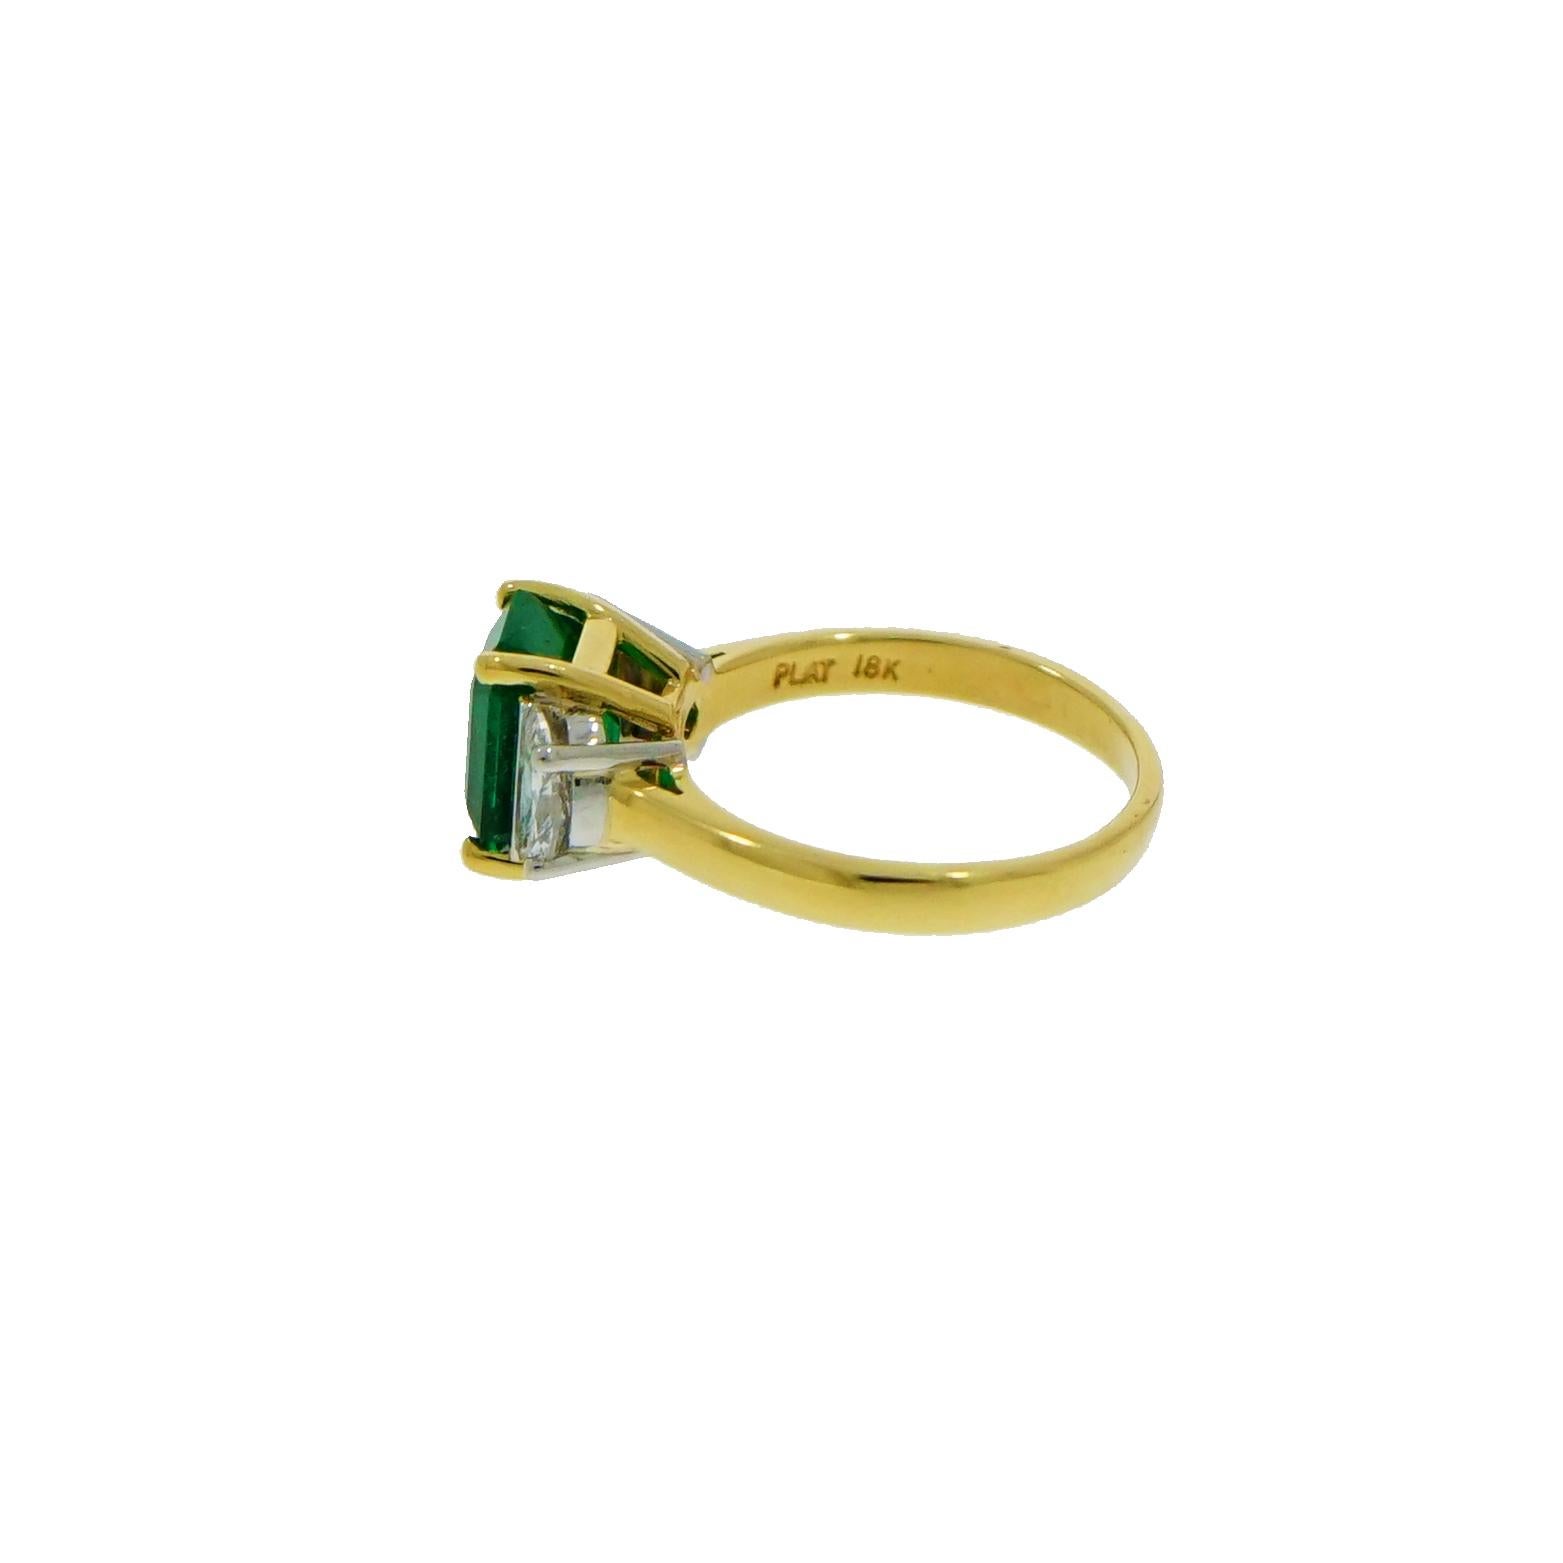 This Emerald and Diamond Ring, was created as the traditional 3 stones ring with the passion of any handmade work and combined for their simple shape. 
The Emerald is set in 18k Yellow Gold and adorned with half moon shaped diamonds set at each side